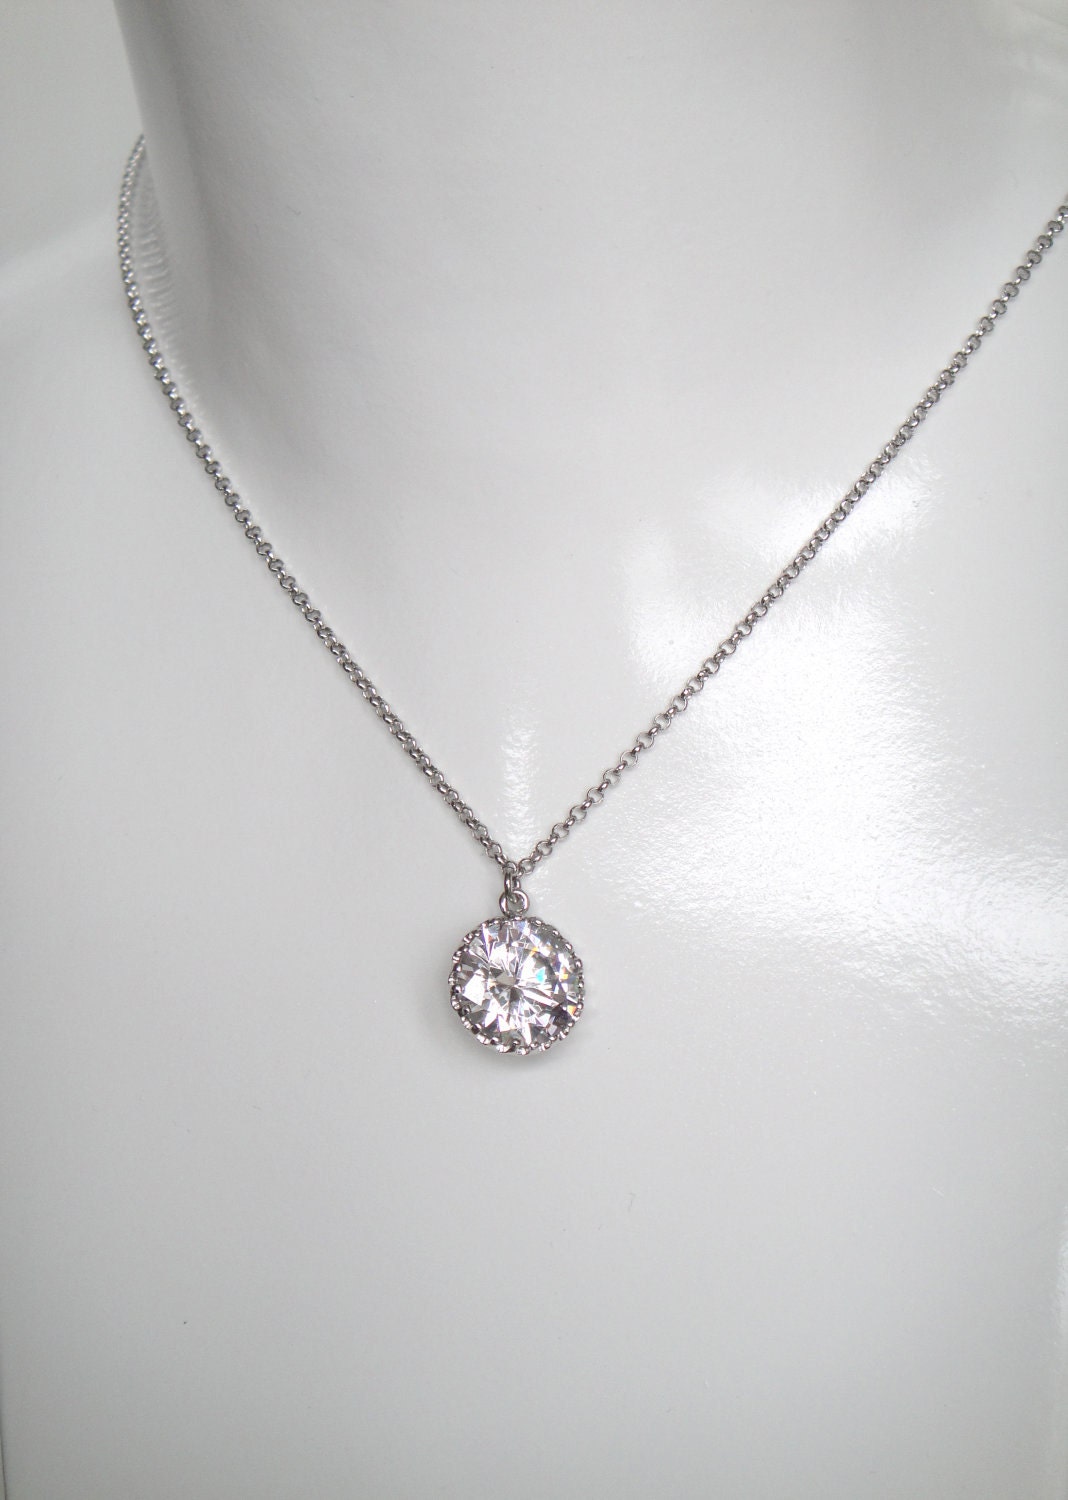 Items similar to Silver Necklace Bridesmaids Jewelry Silver Wedding ...